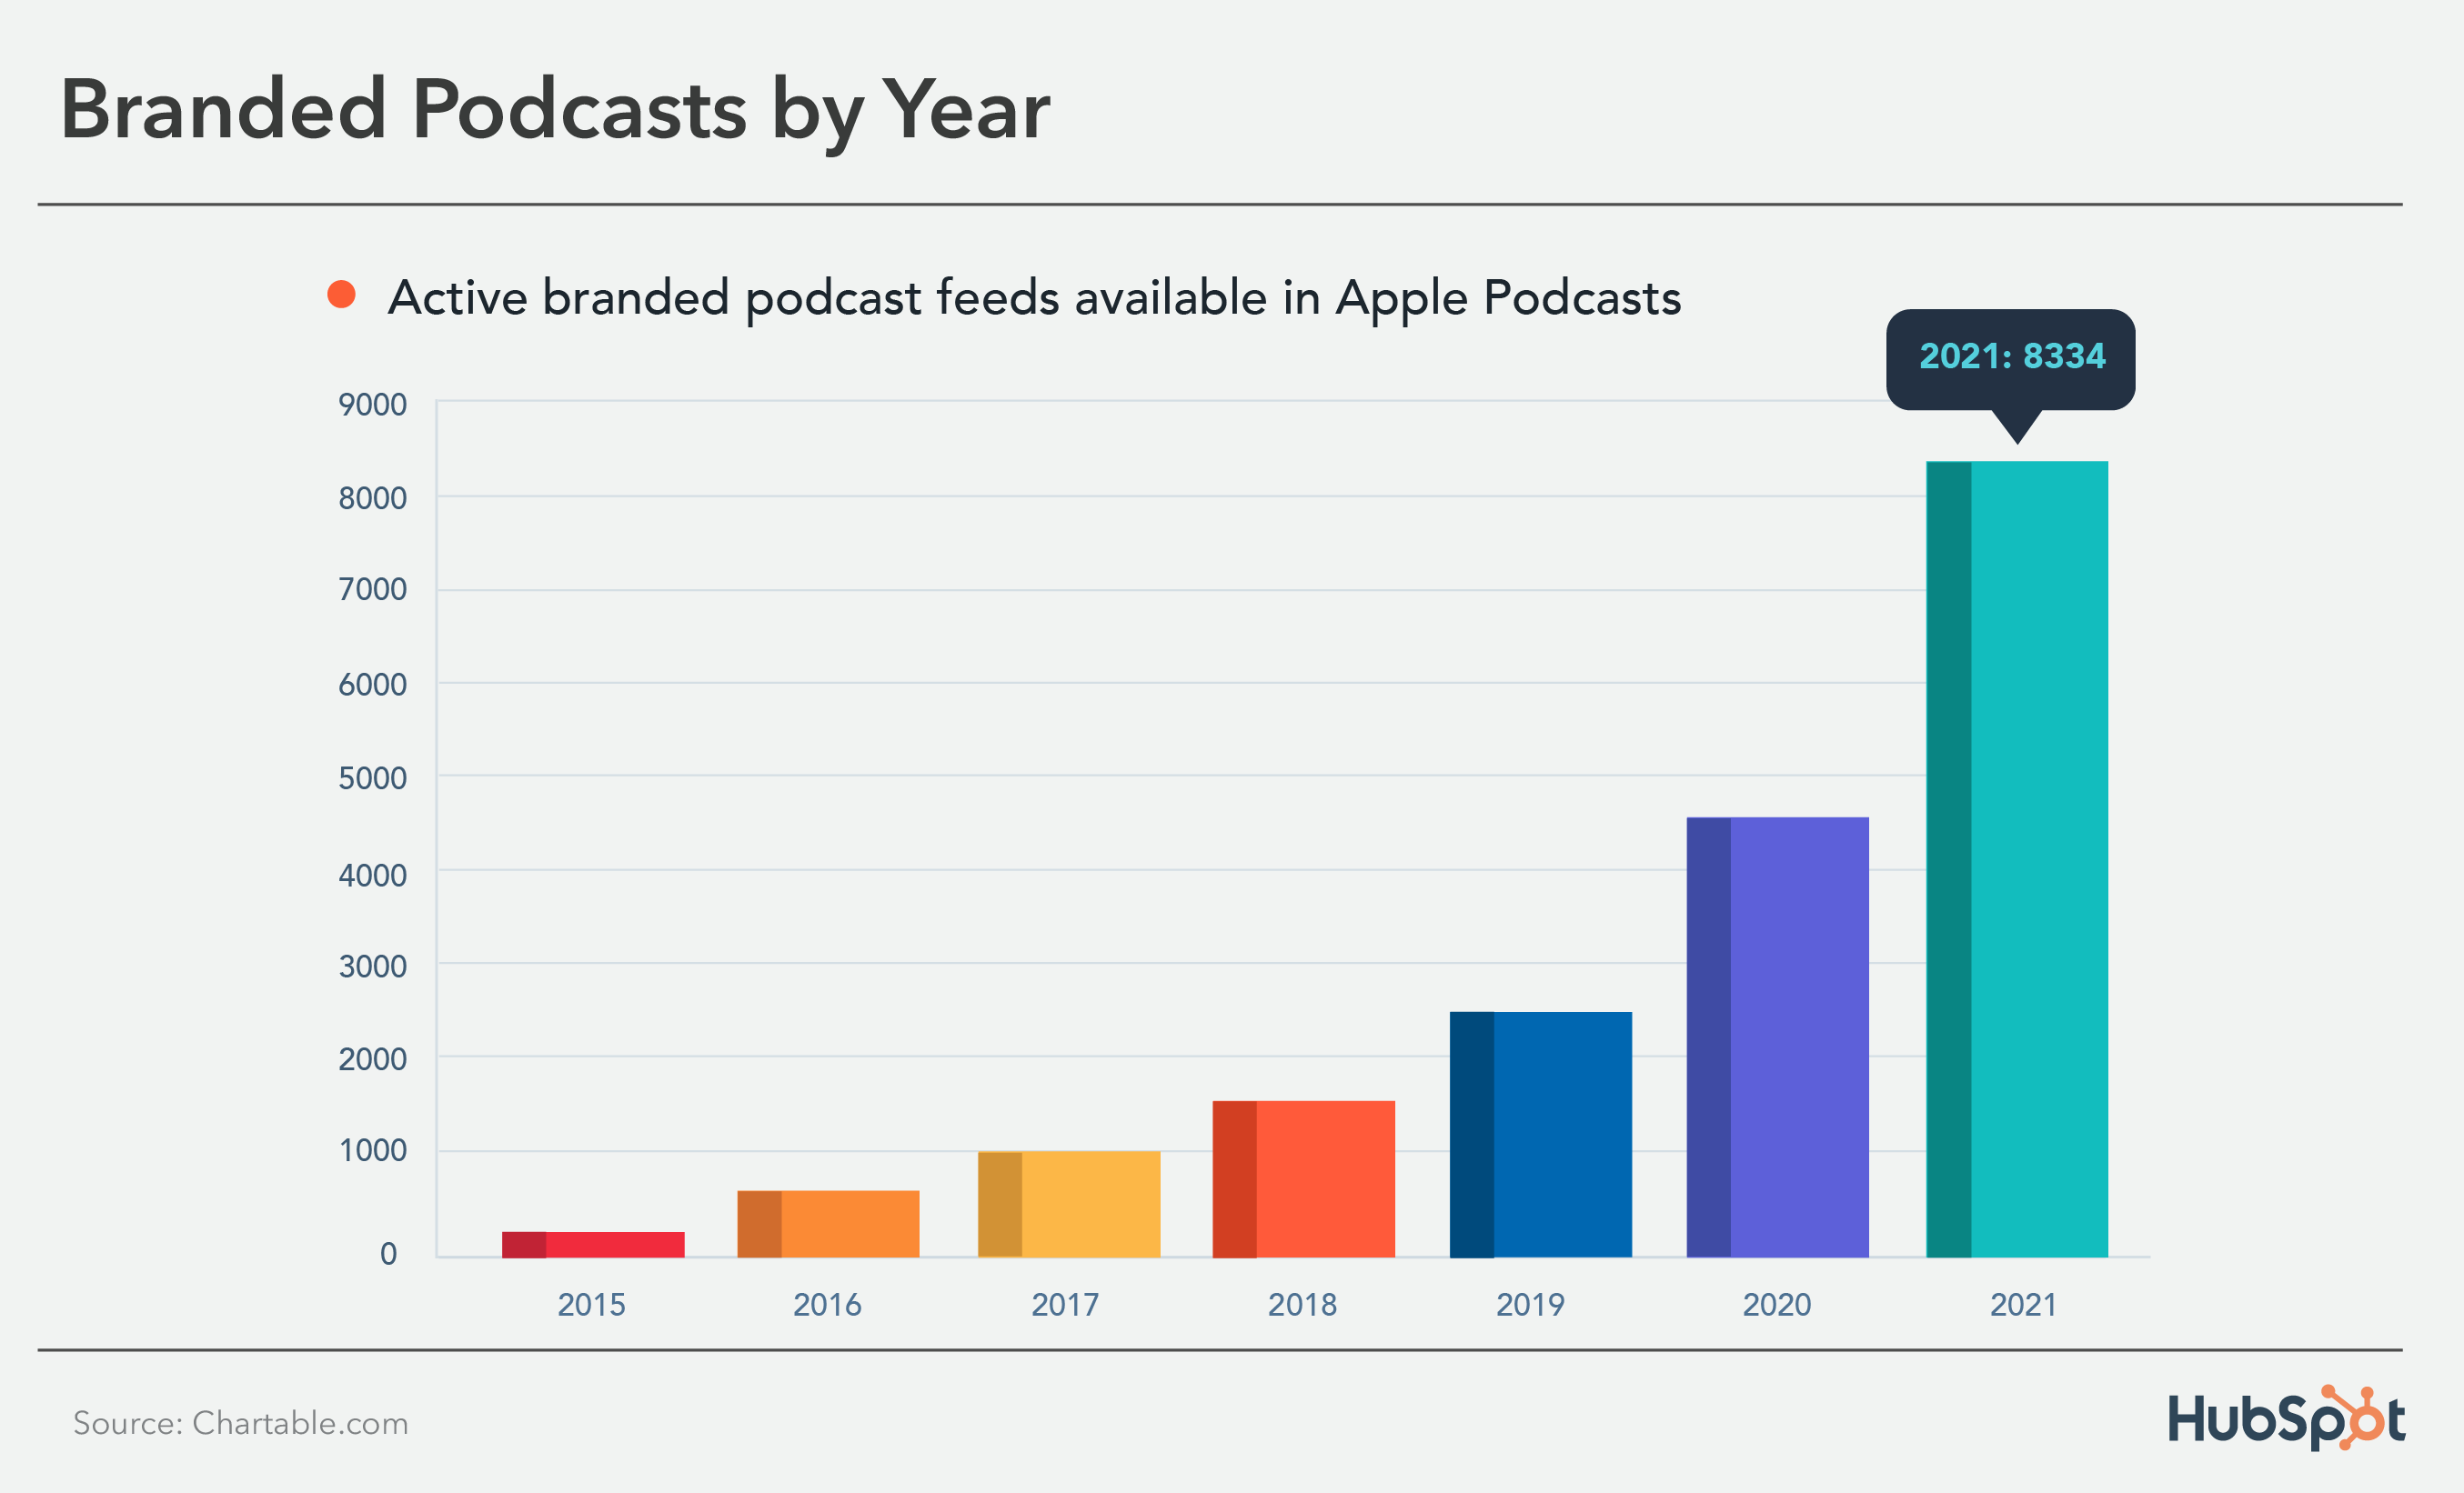 Podcast Stats: number of branded podcasts by year